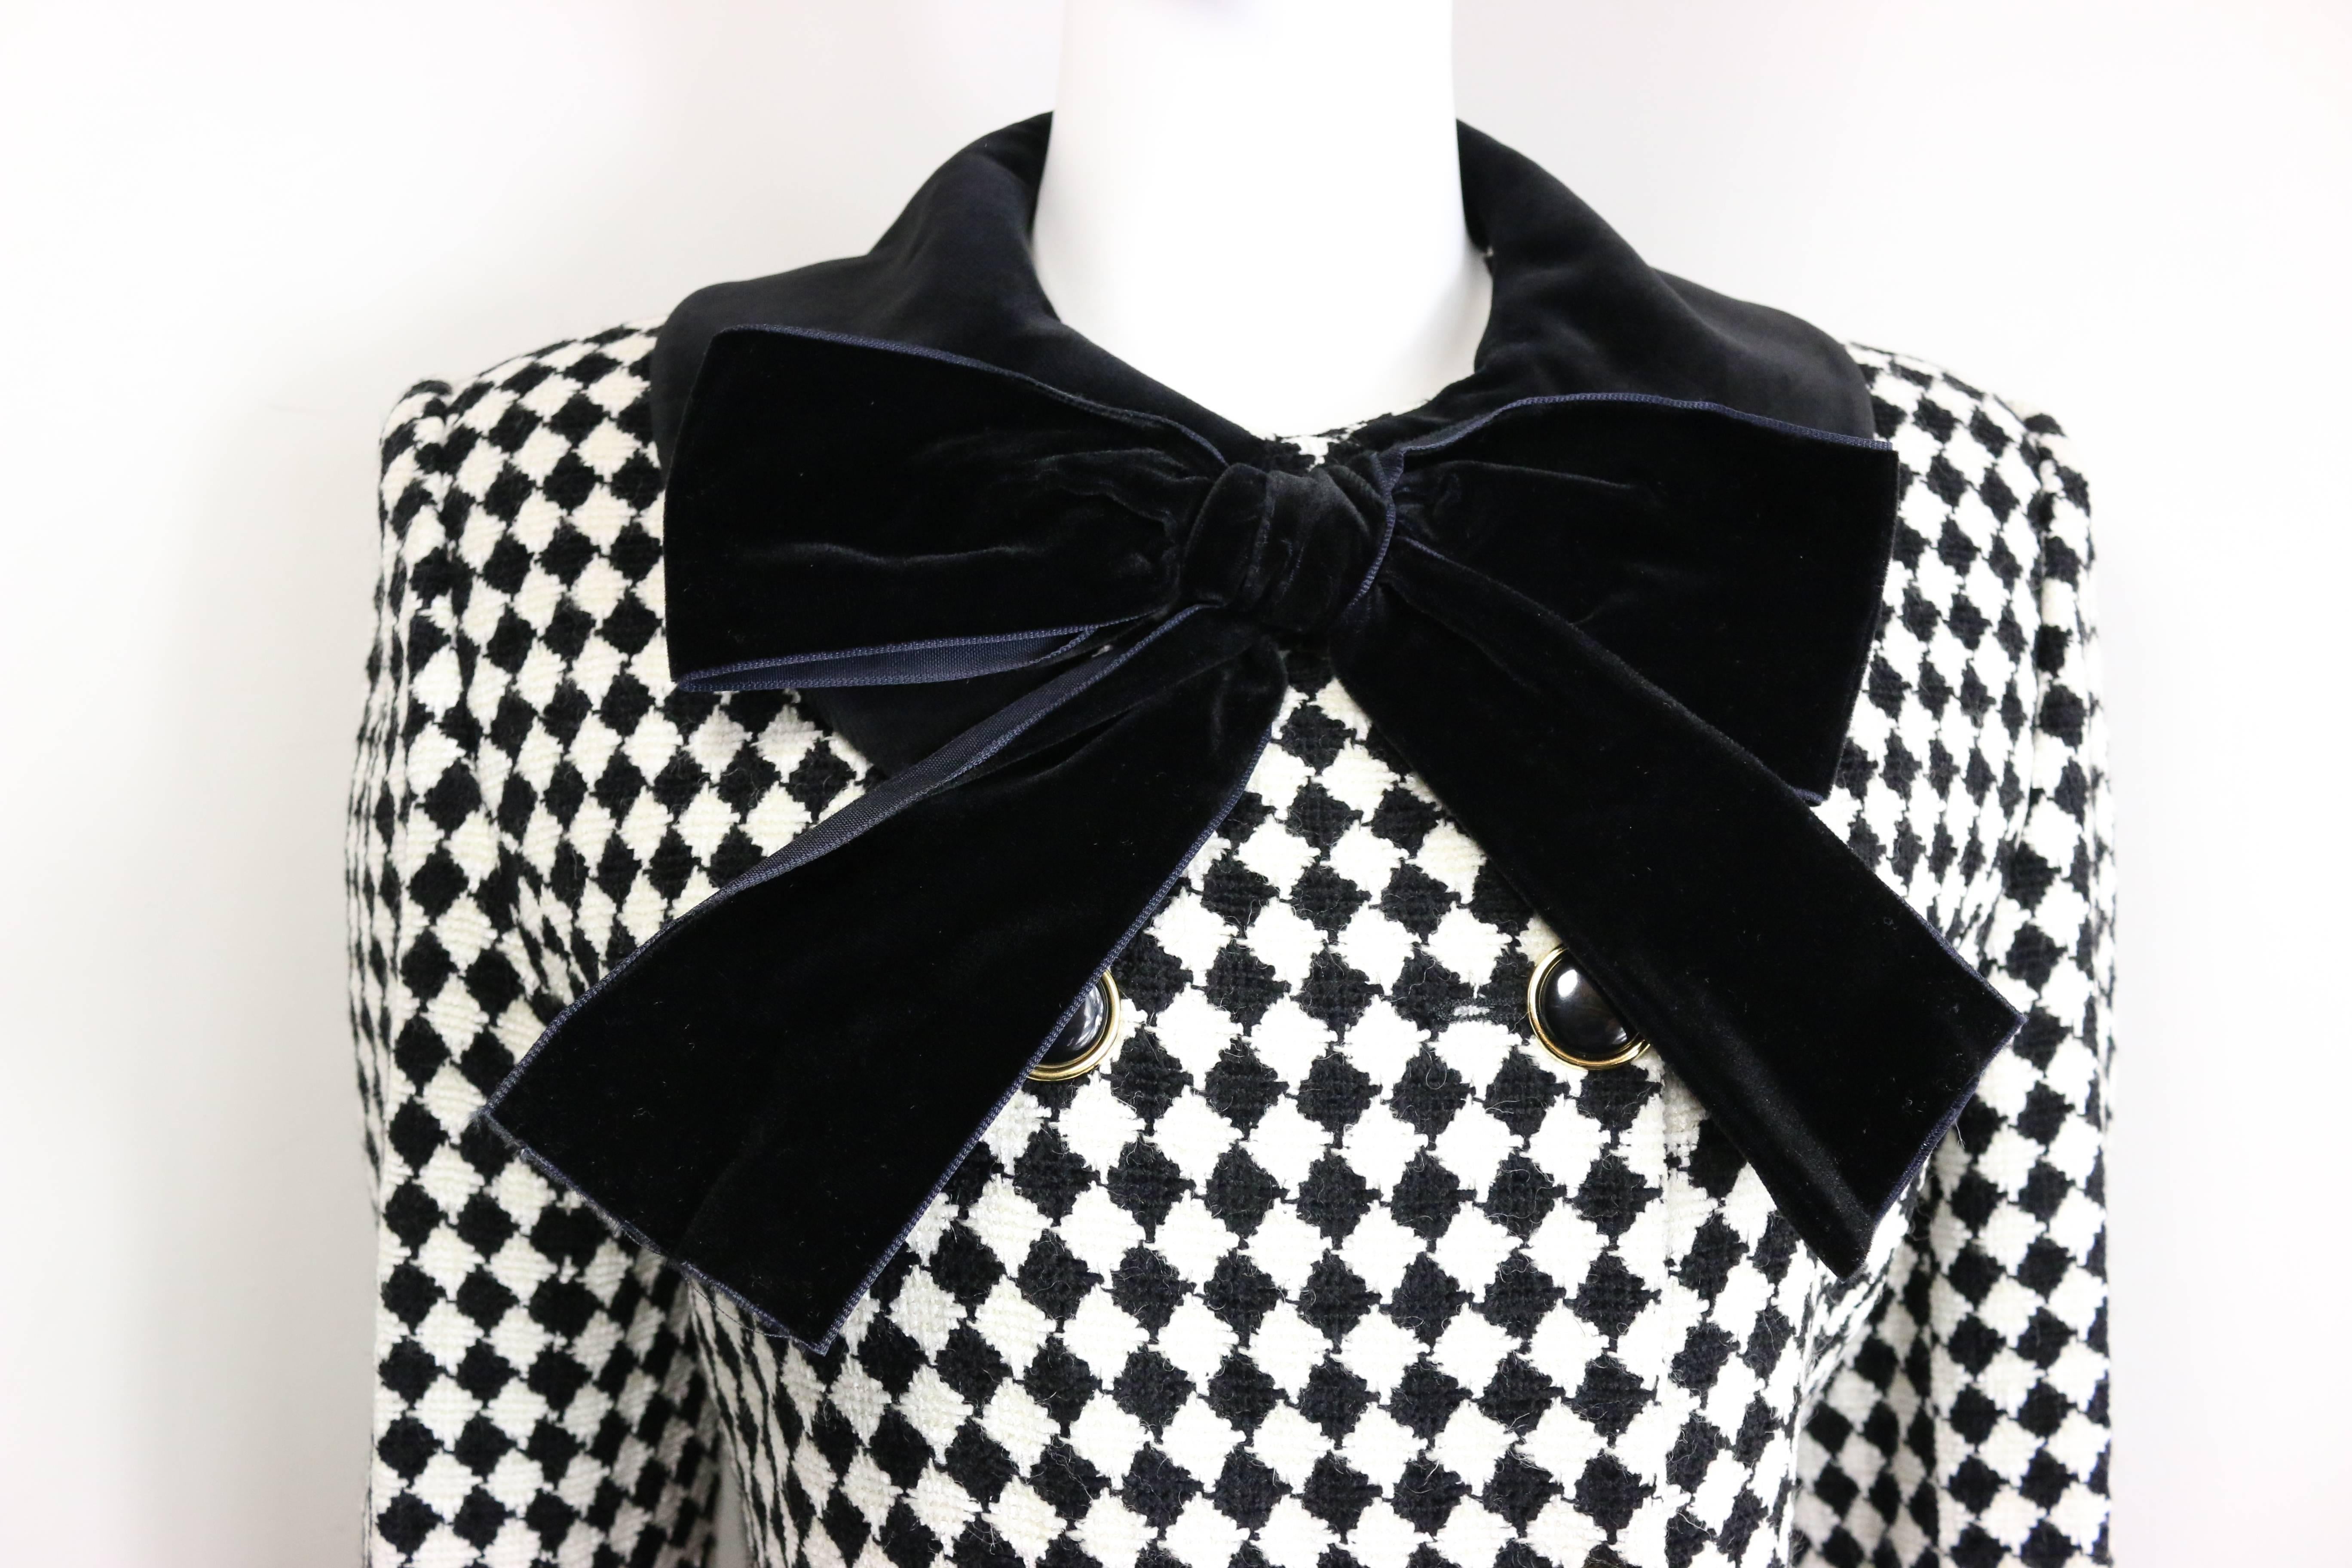 - Vintage 90s Angelo Tarlazzi double breasted black and white harlequin check coat attached with a black velvet bow collar. This 70s looking coat is very retro looking and fun to wear! 

- Featuring Twelve black gold toned setting buttons